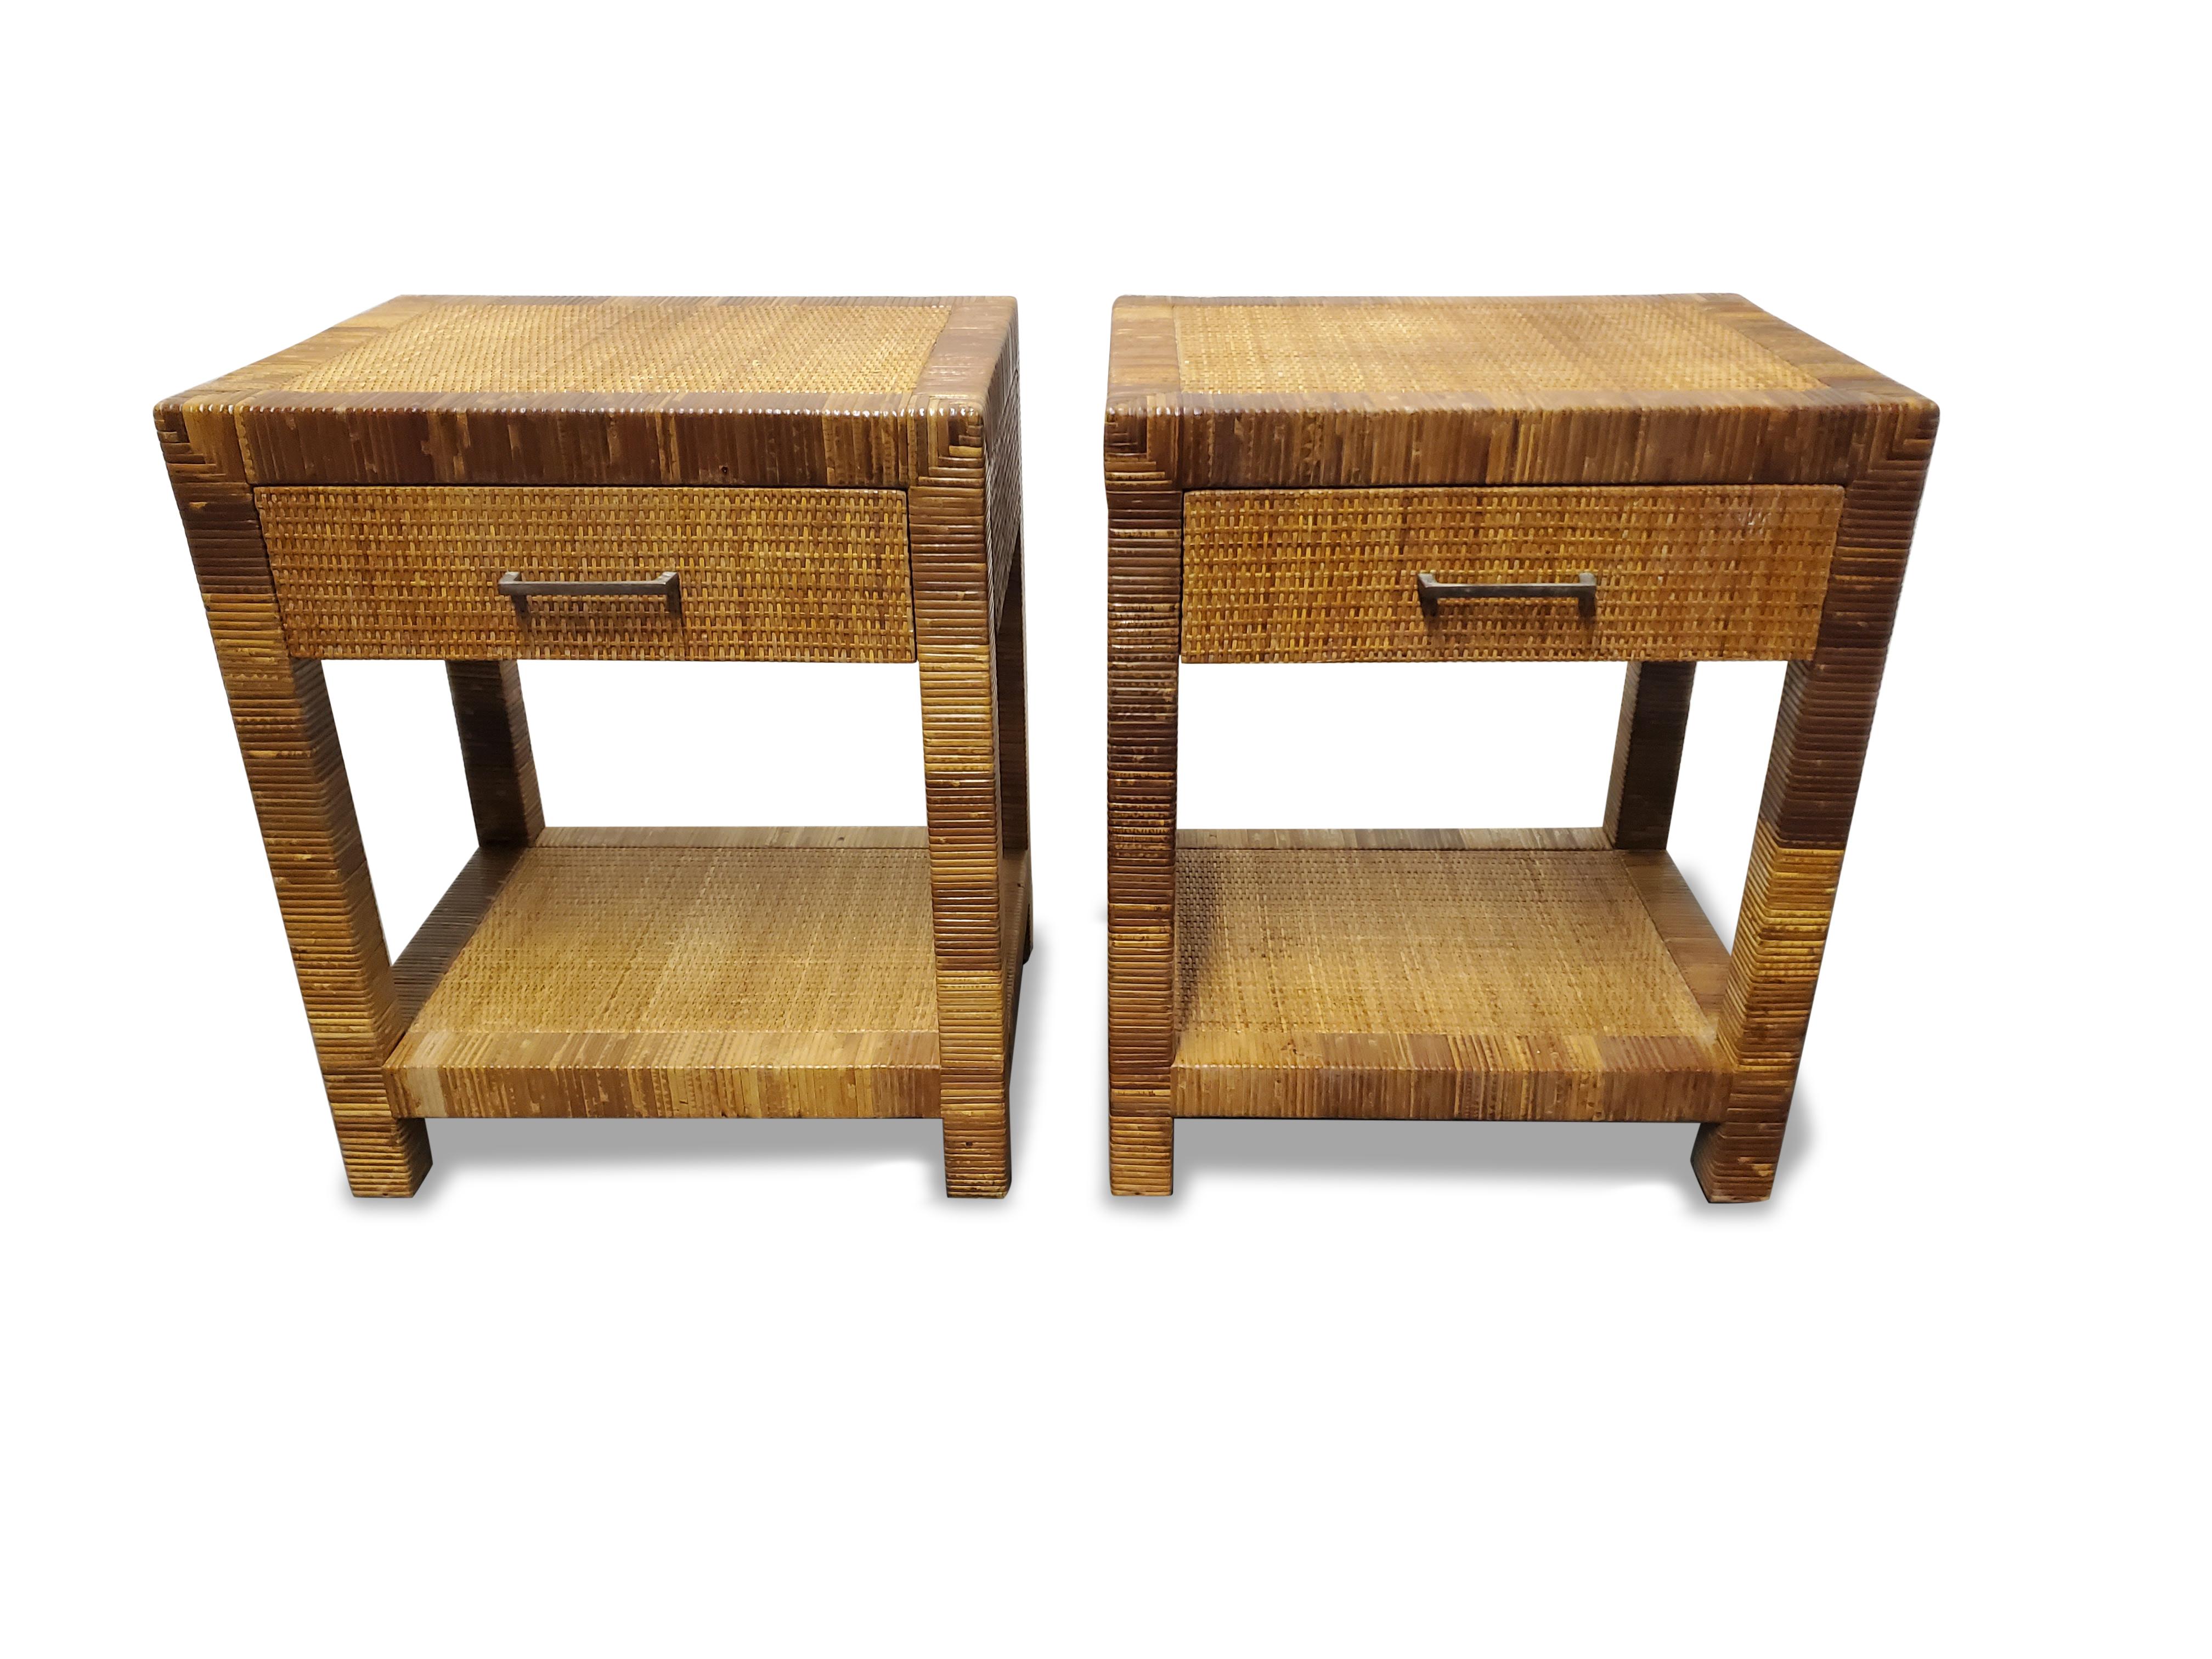 Pair of signed Bielecky Brothers Cane / Raffia wrapped nightstands 

Floor to lower shelf:
5 1/8